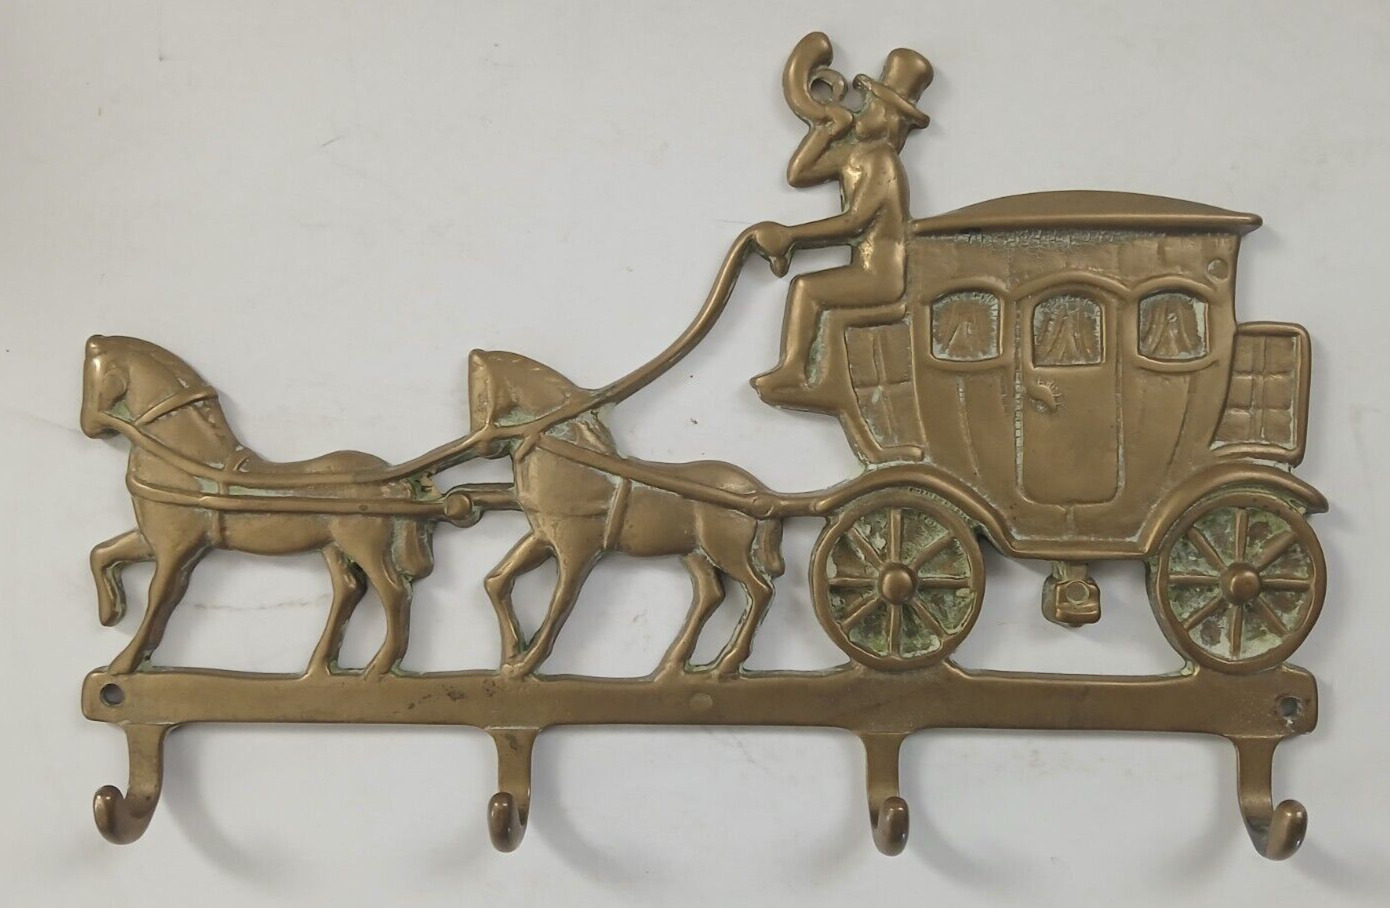 Vintage Solid Brass Horse & Carriage 4 Hook Wall Hanging Key Holder